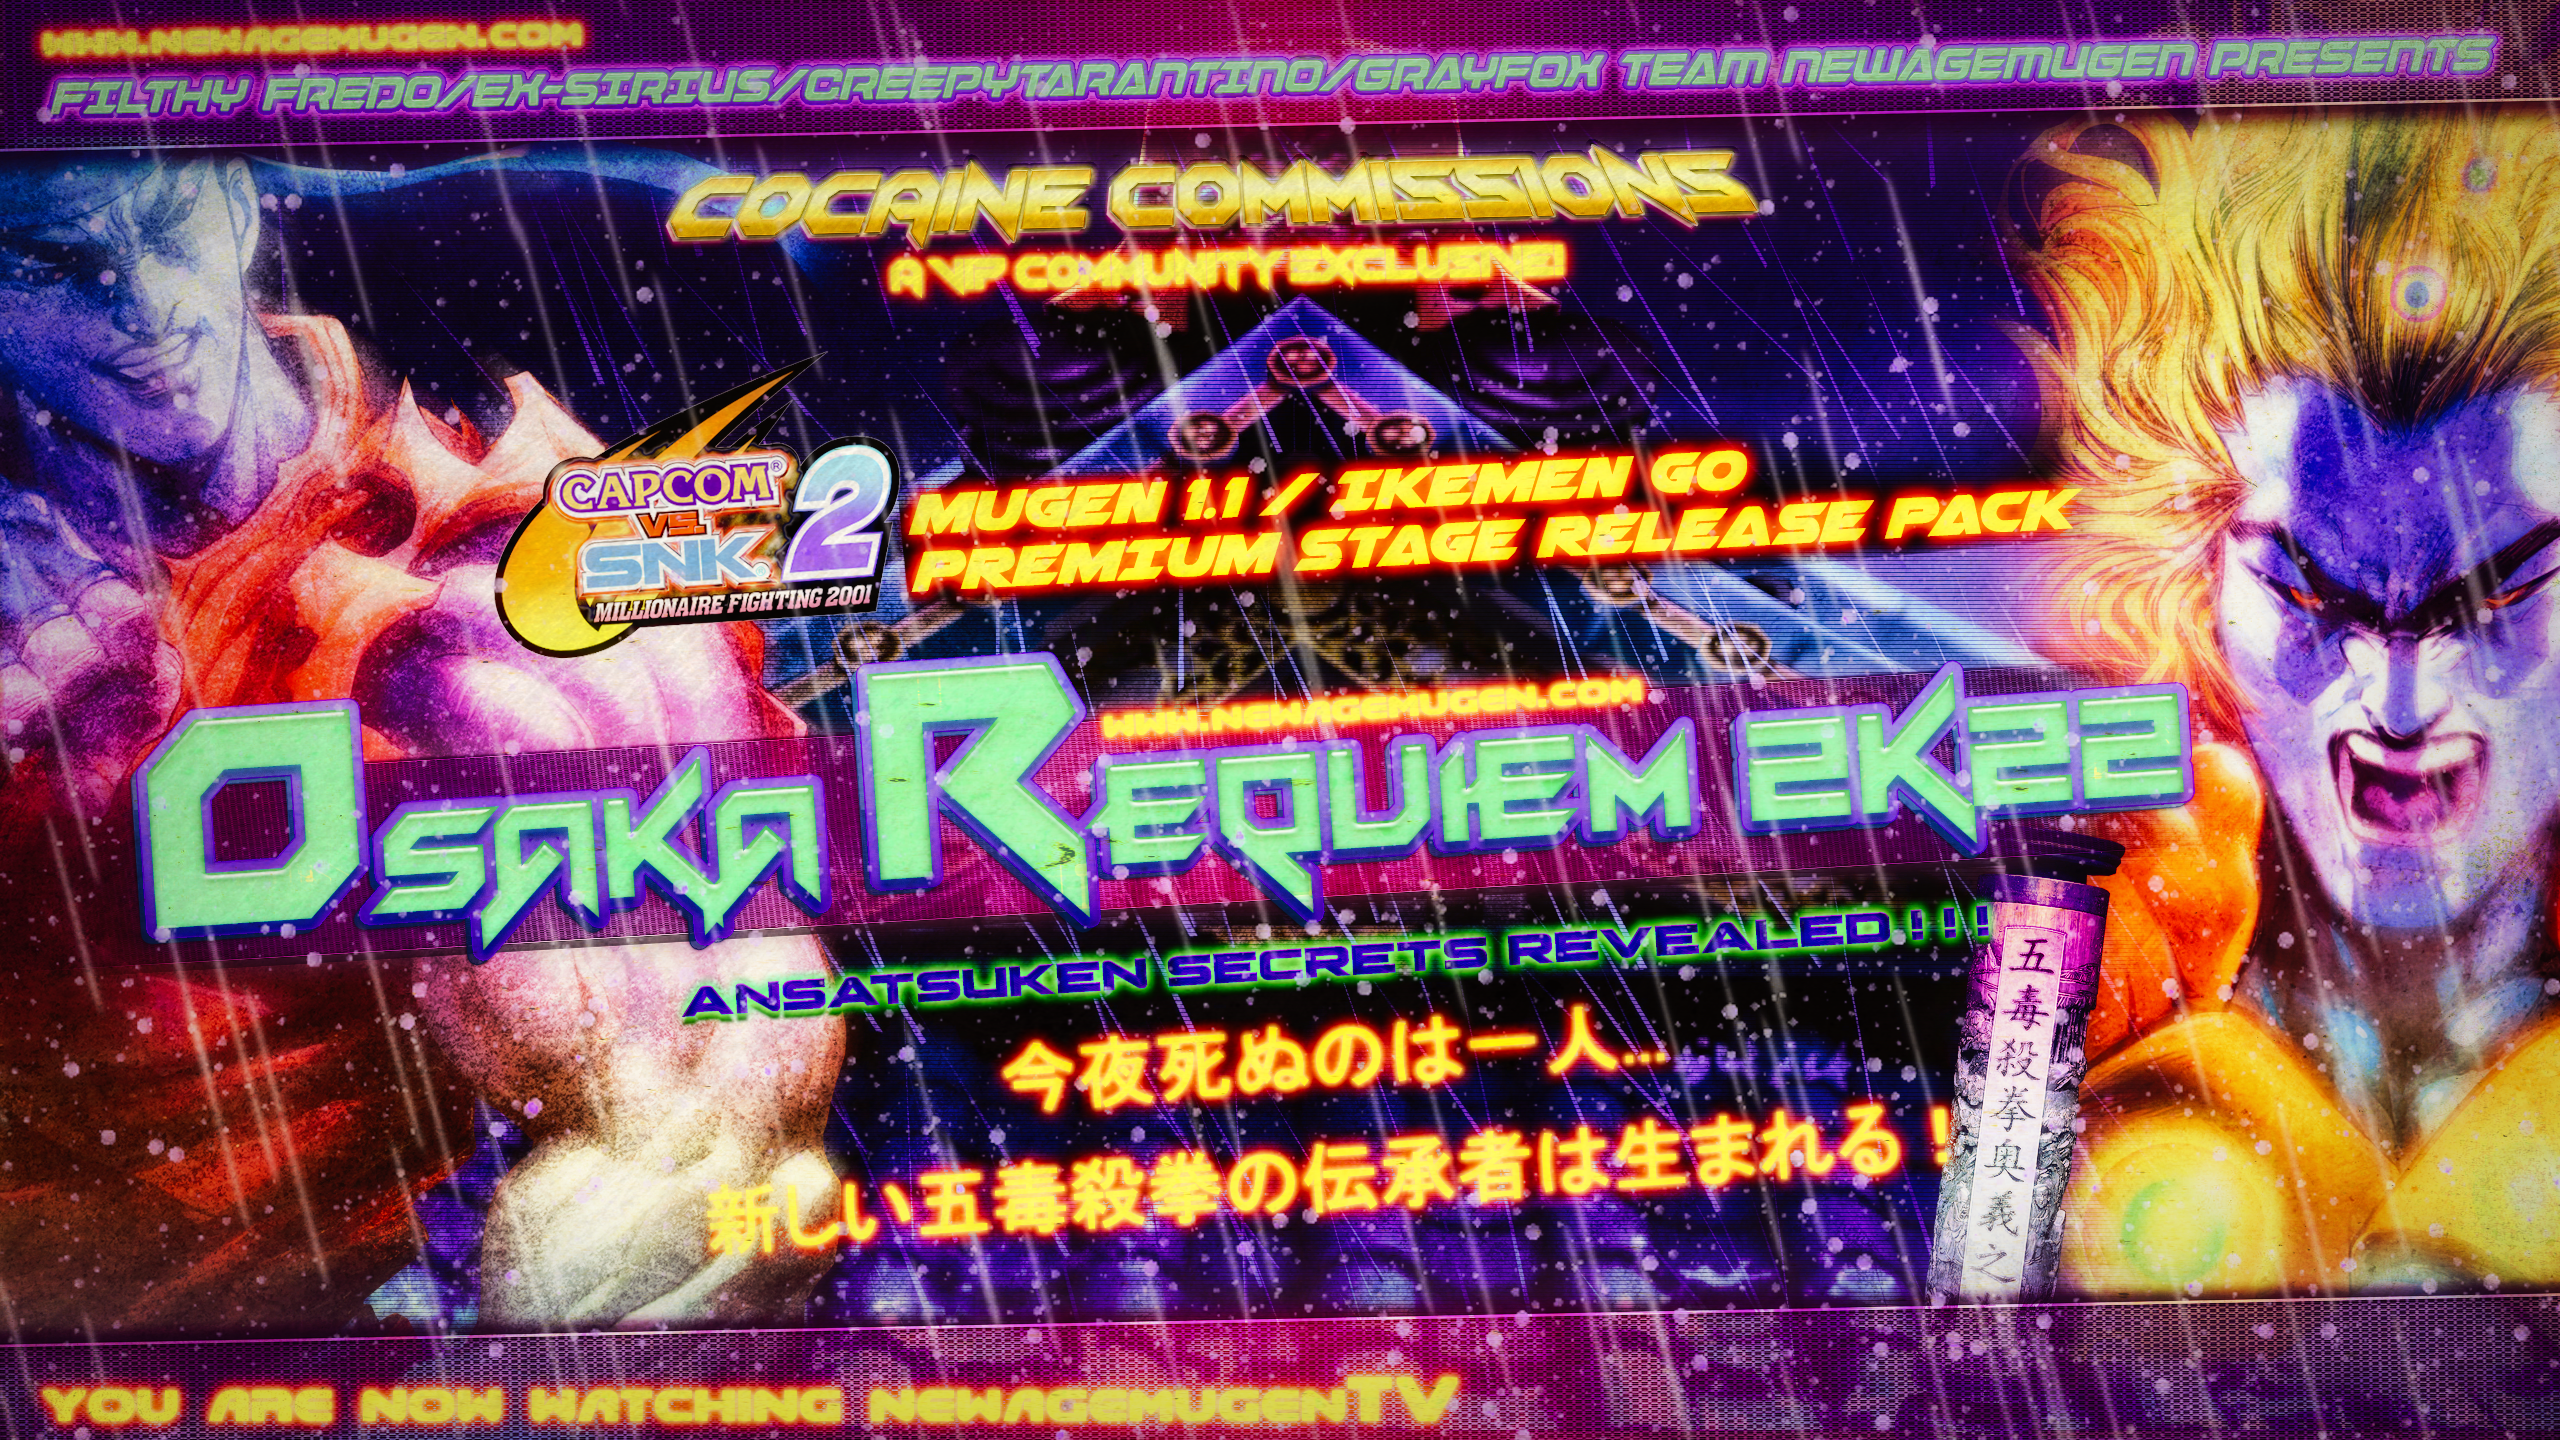  [VIP/Sponsored content][Mugen 1.1 HD Stage Pack] xX''OSAKA_REQUIEM_2K22''Xx (commissioned by GrayFox) 51854998362_b8d7be0aed_o